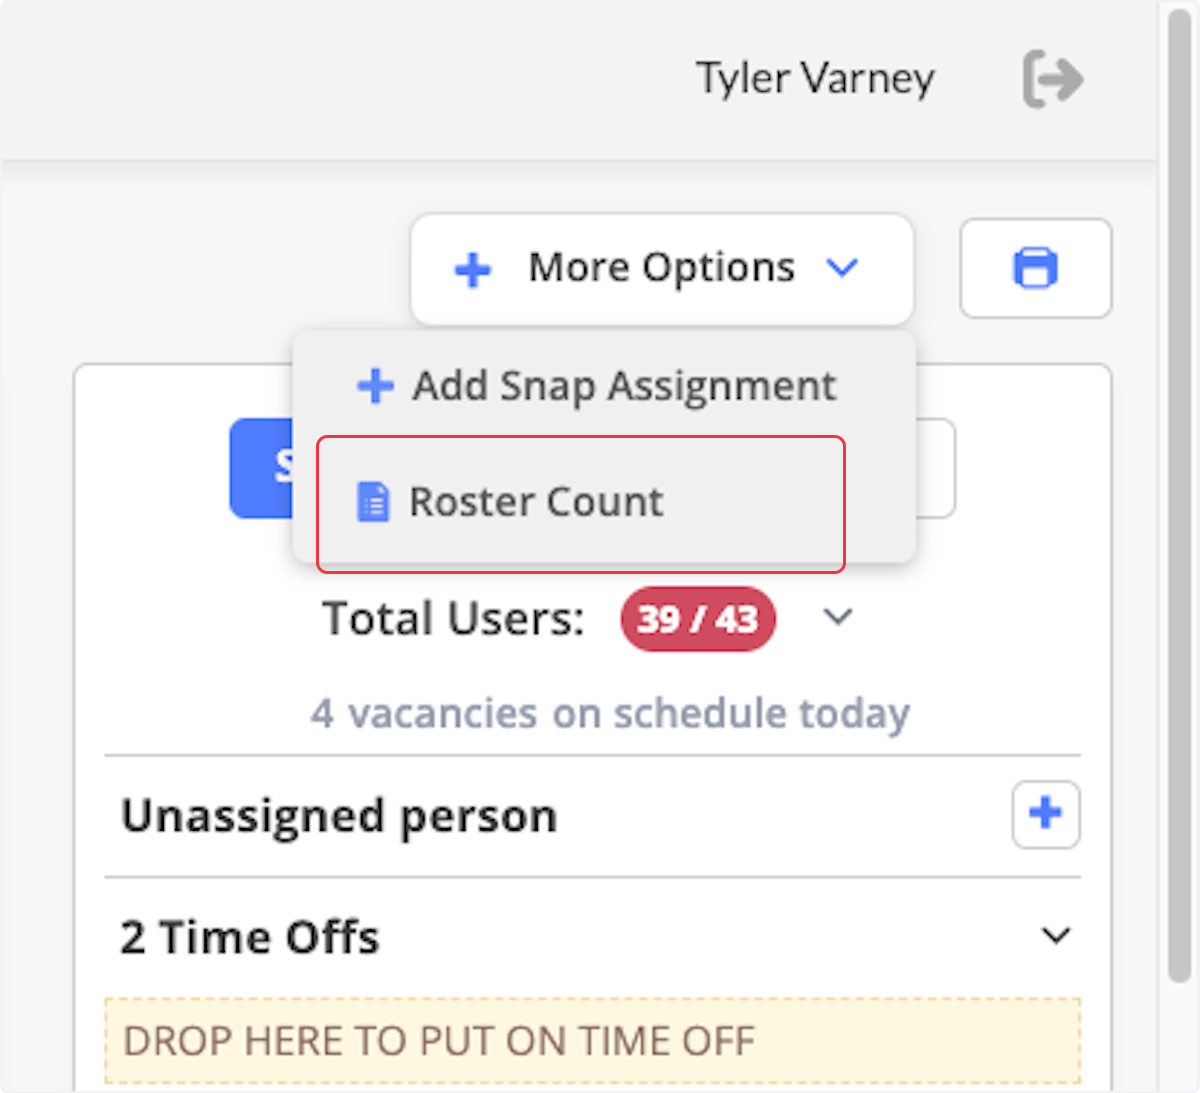 Hover over More Options and click Roster Count. 